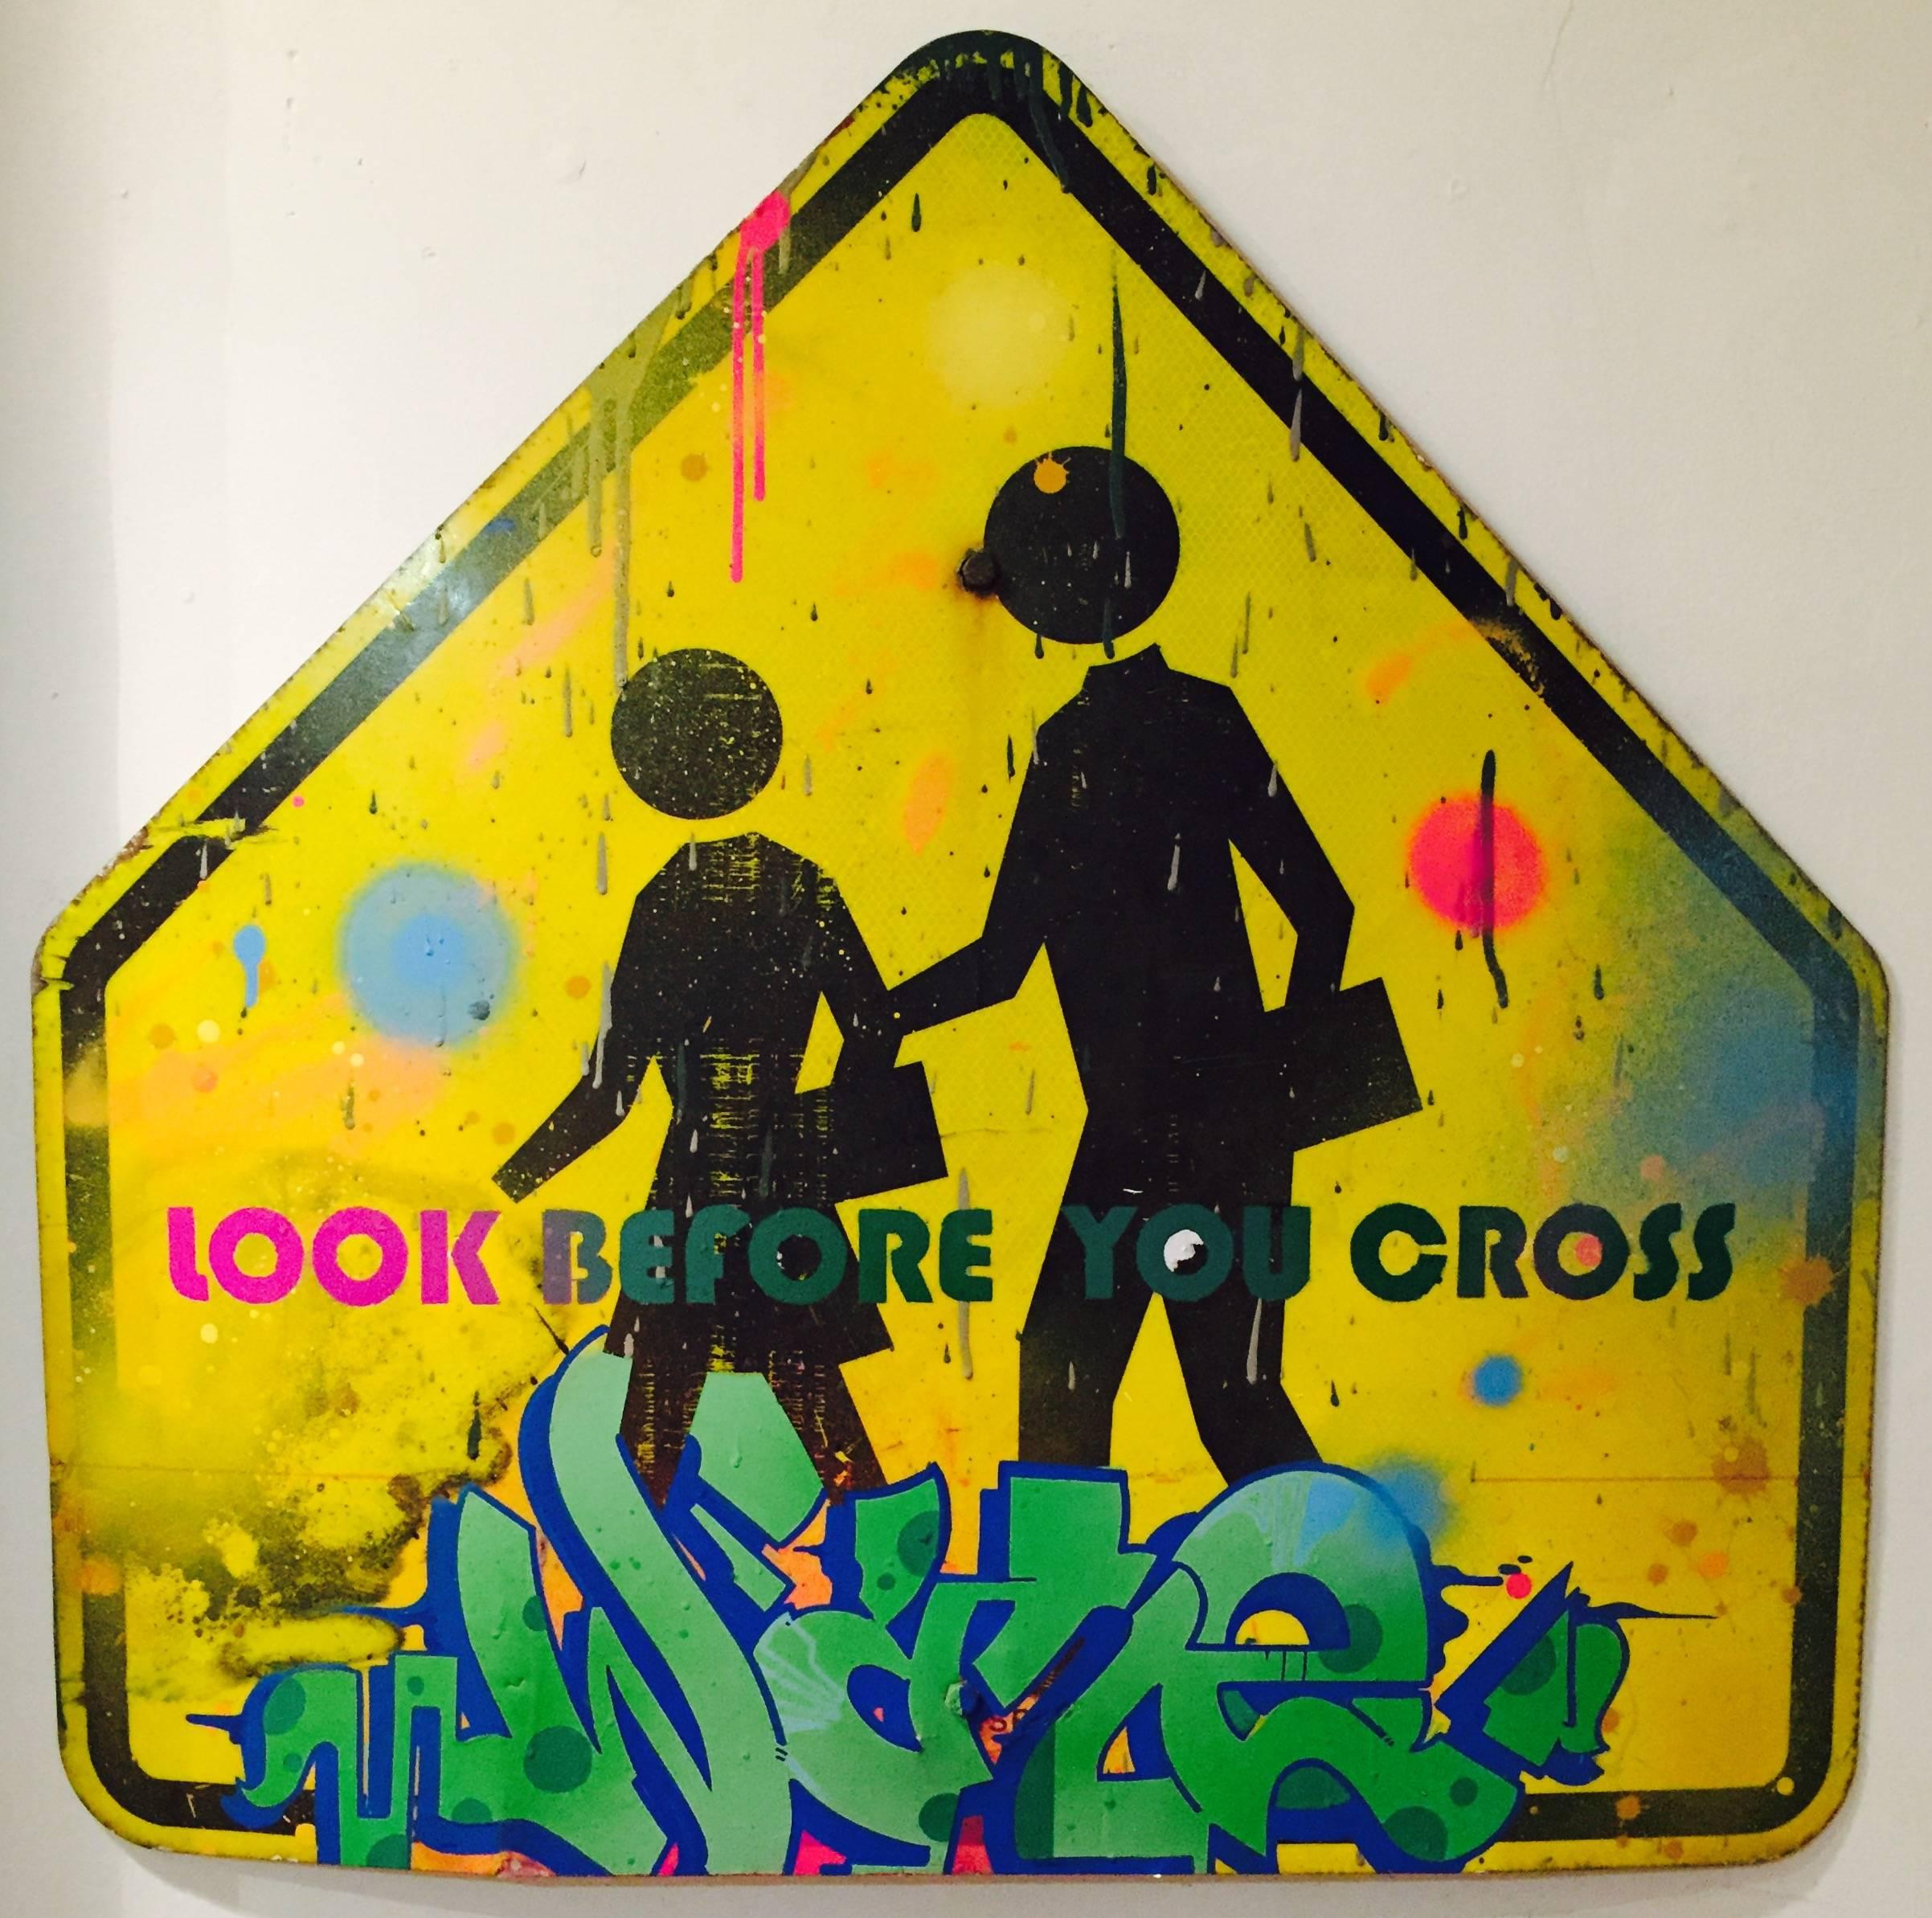 Look Before You Cross - Mixed Media Art by Wane One